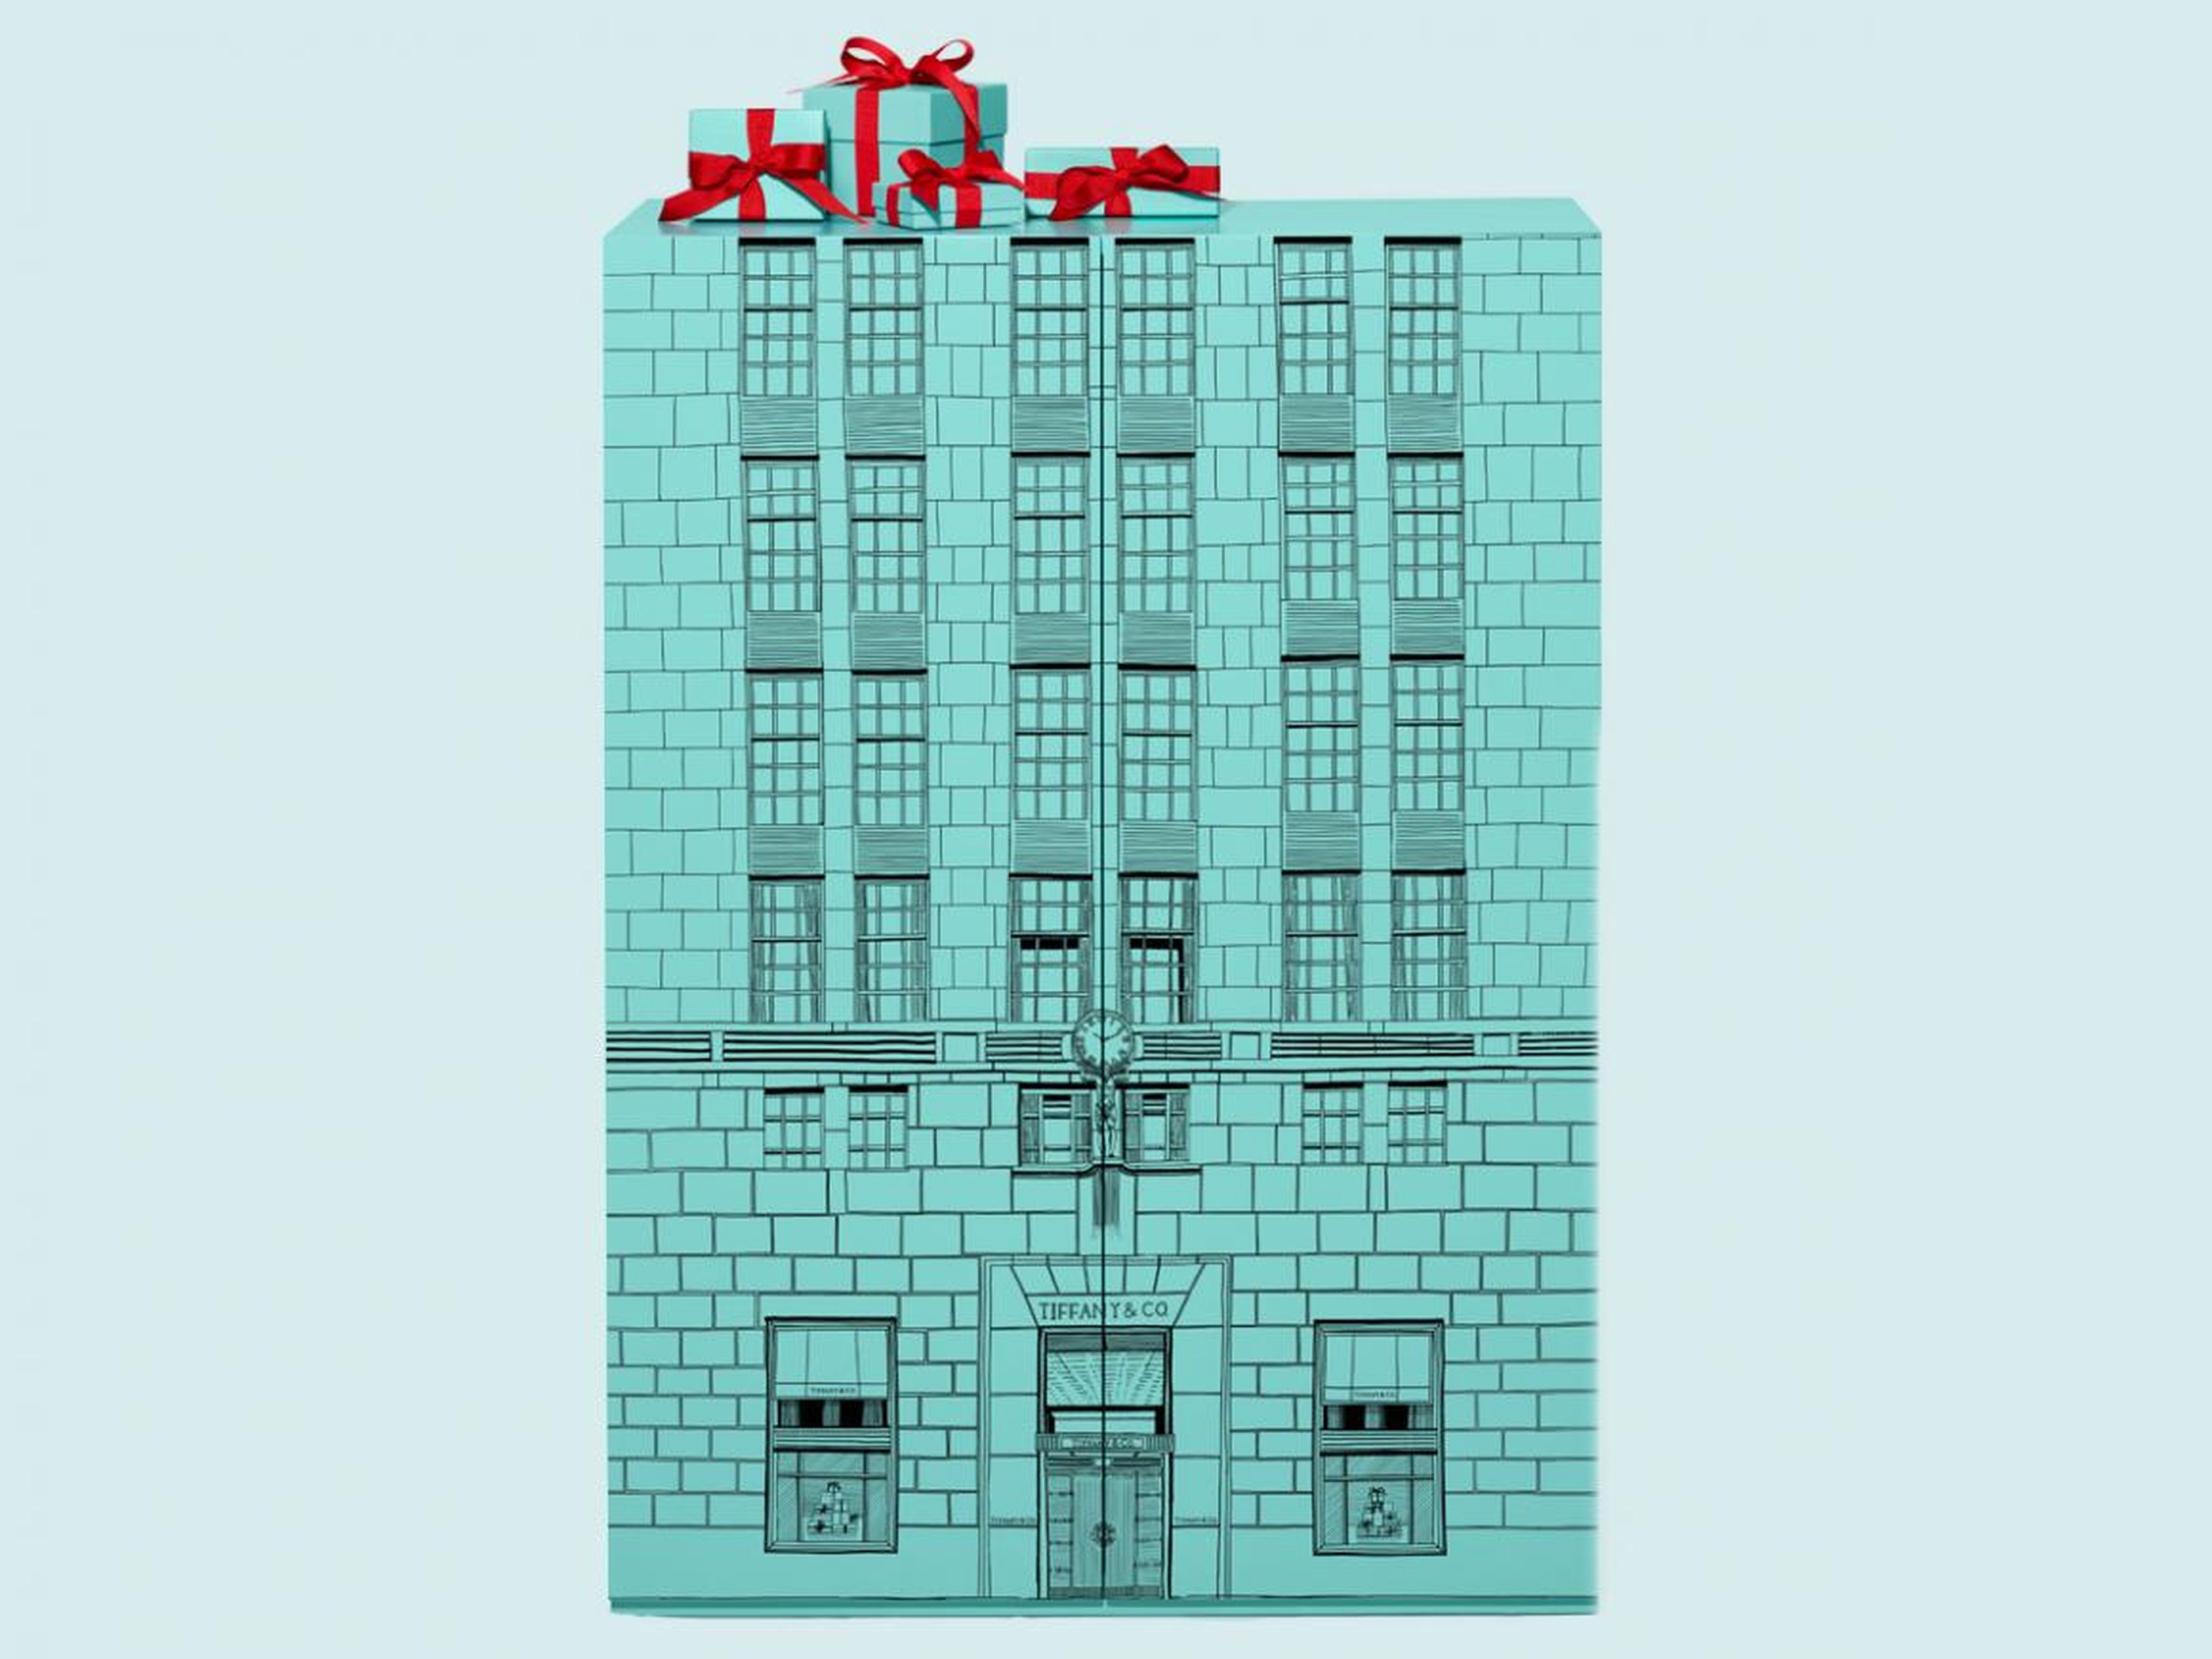 The box was designed to look like the Tiffany flagship store.